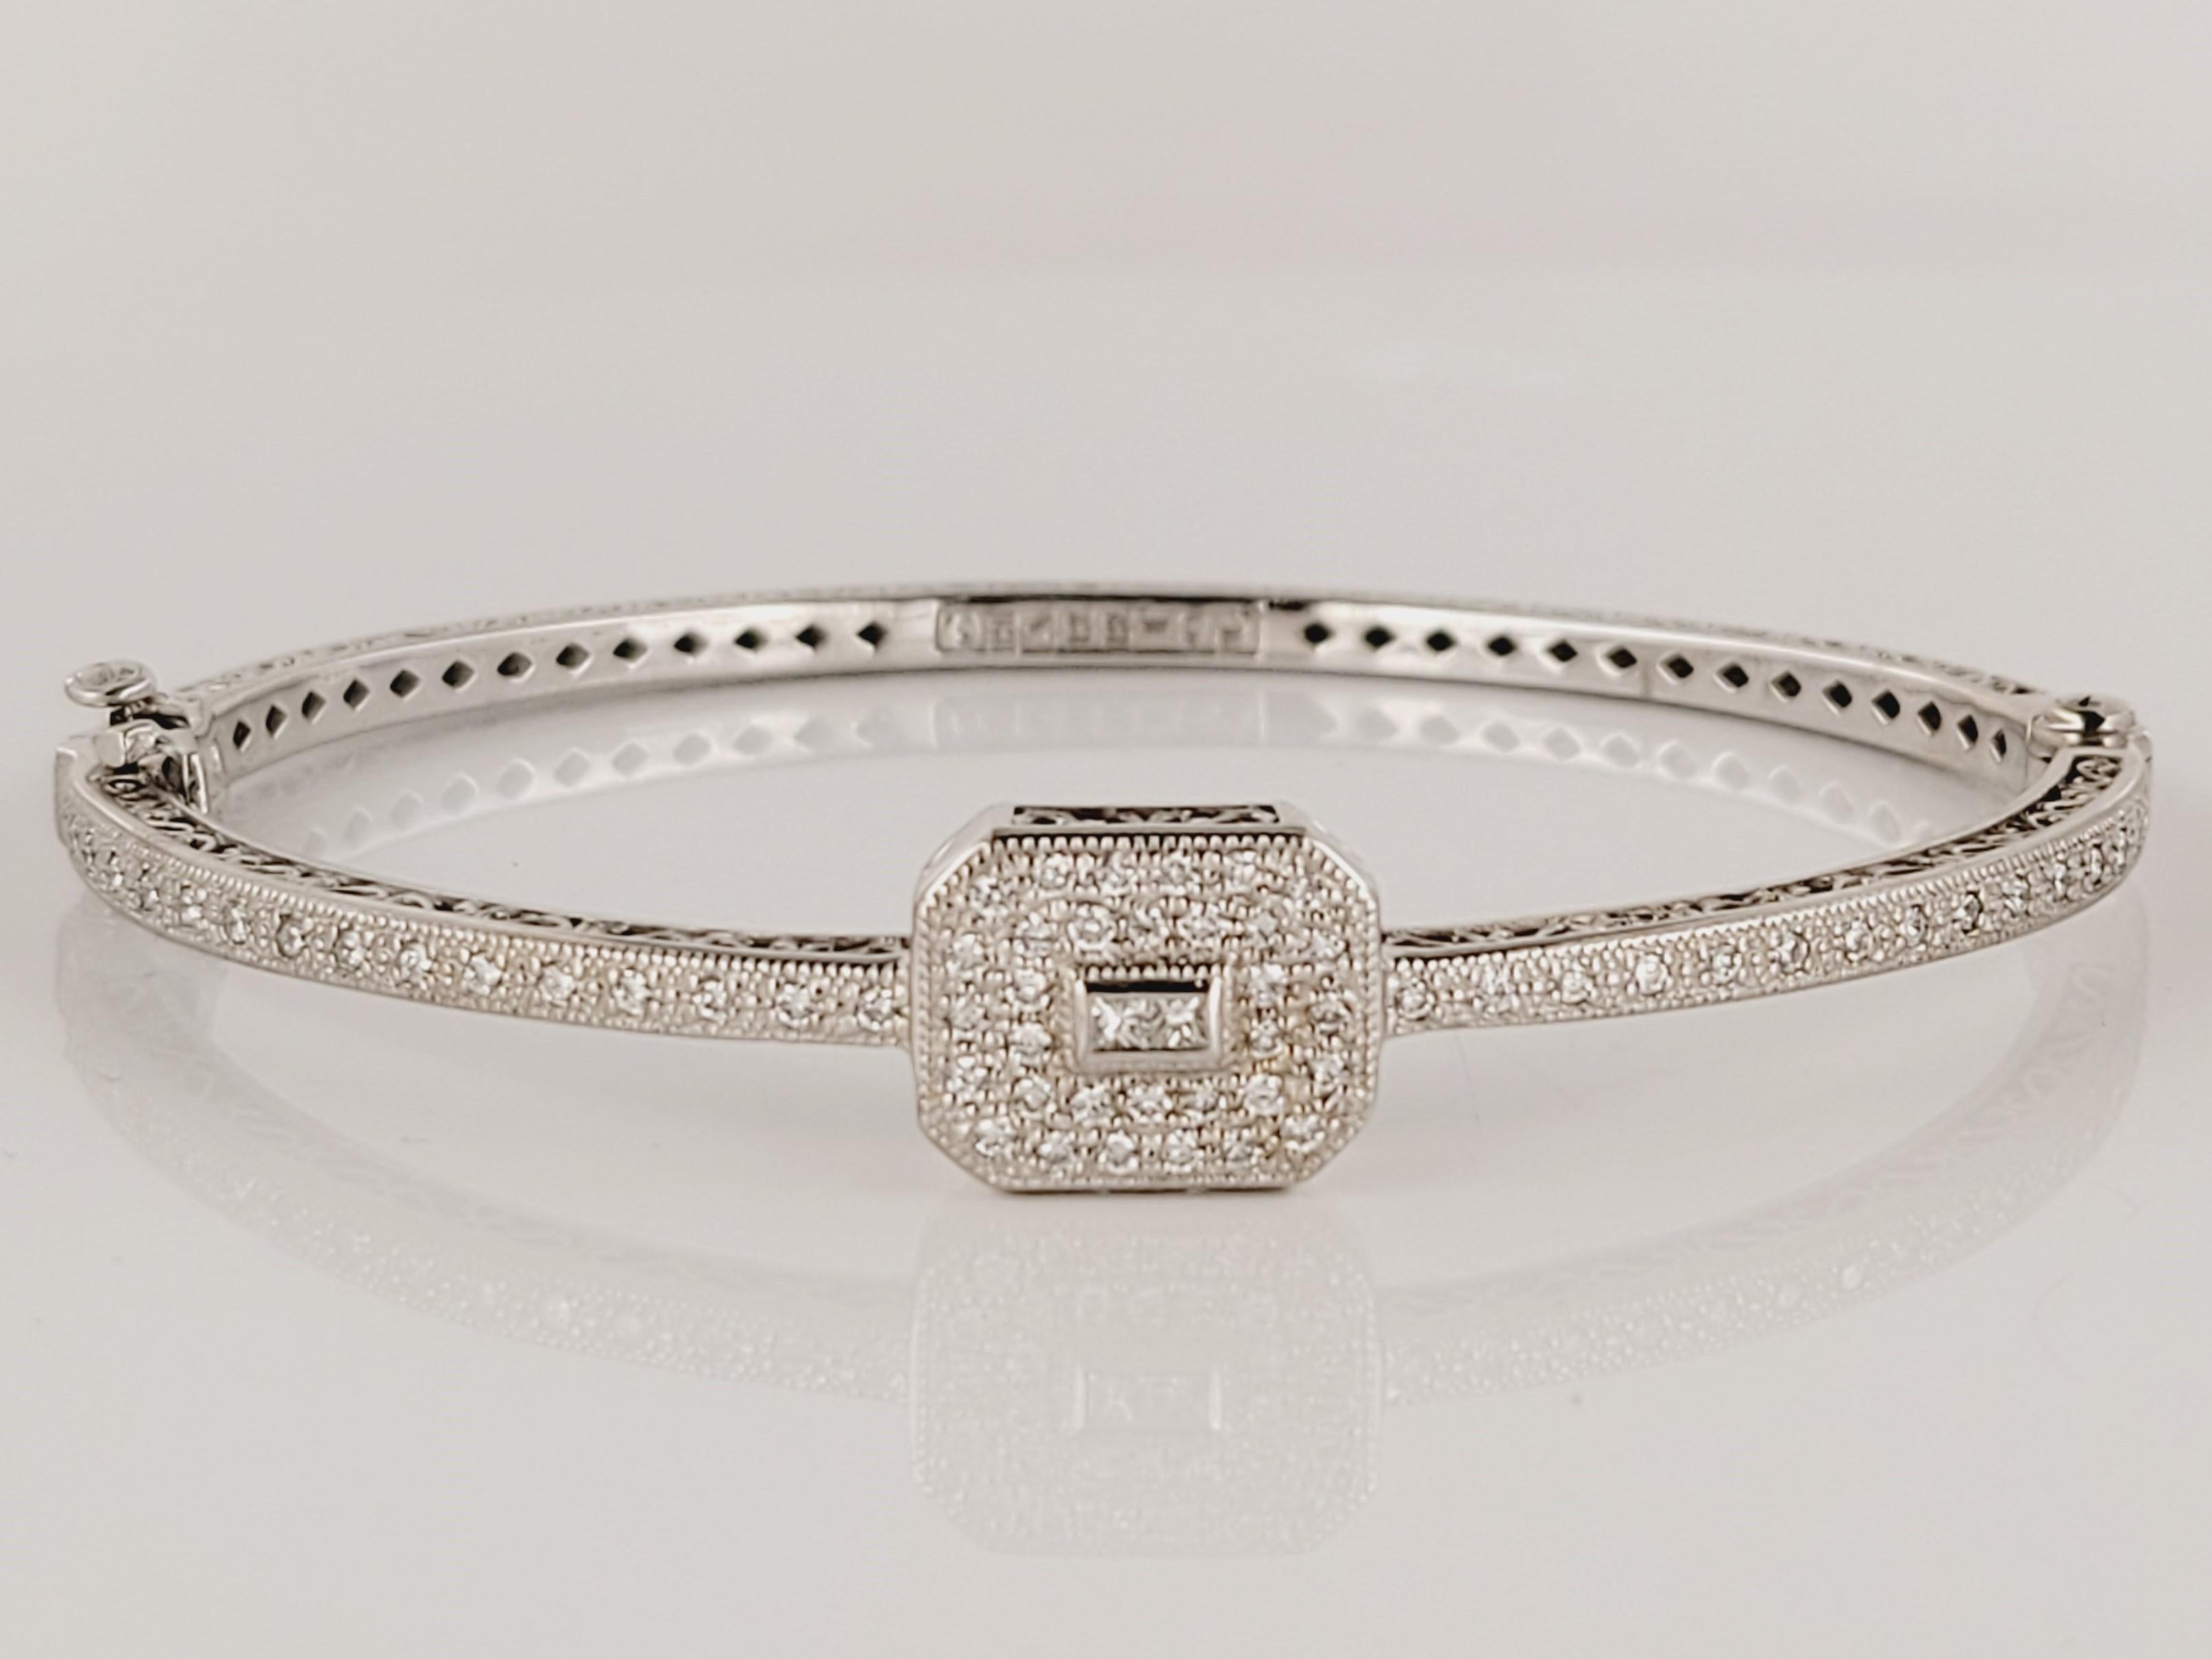 Rare Charriol White Gold Bangle with Diamonds
-Mint condition
-18k White Gold
-Weight: 17.5 gr
-Inner circumference: 6.8”
-Ornament Dimension: 10.7x13.5mm
-64 round pave set diamonds
-2 bezel set princess cut diamonds
-Total carat weight: 0.67